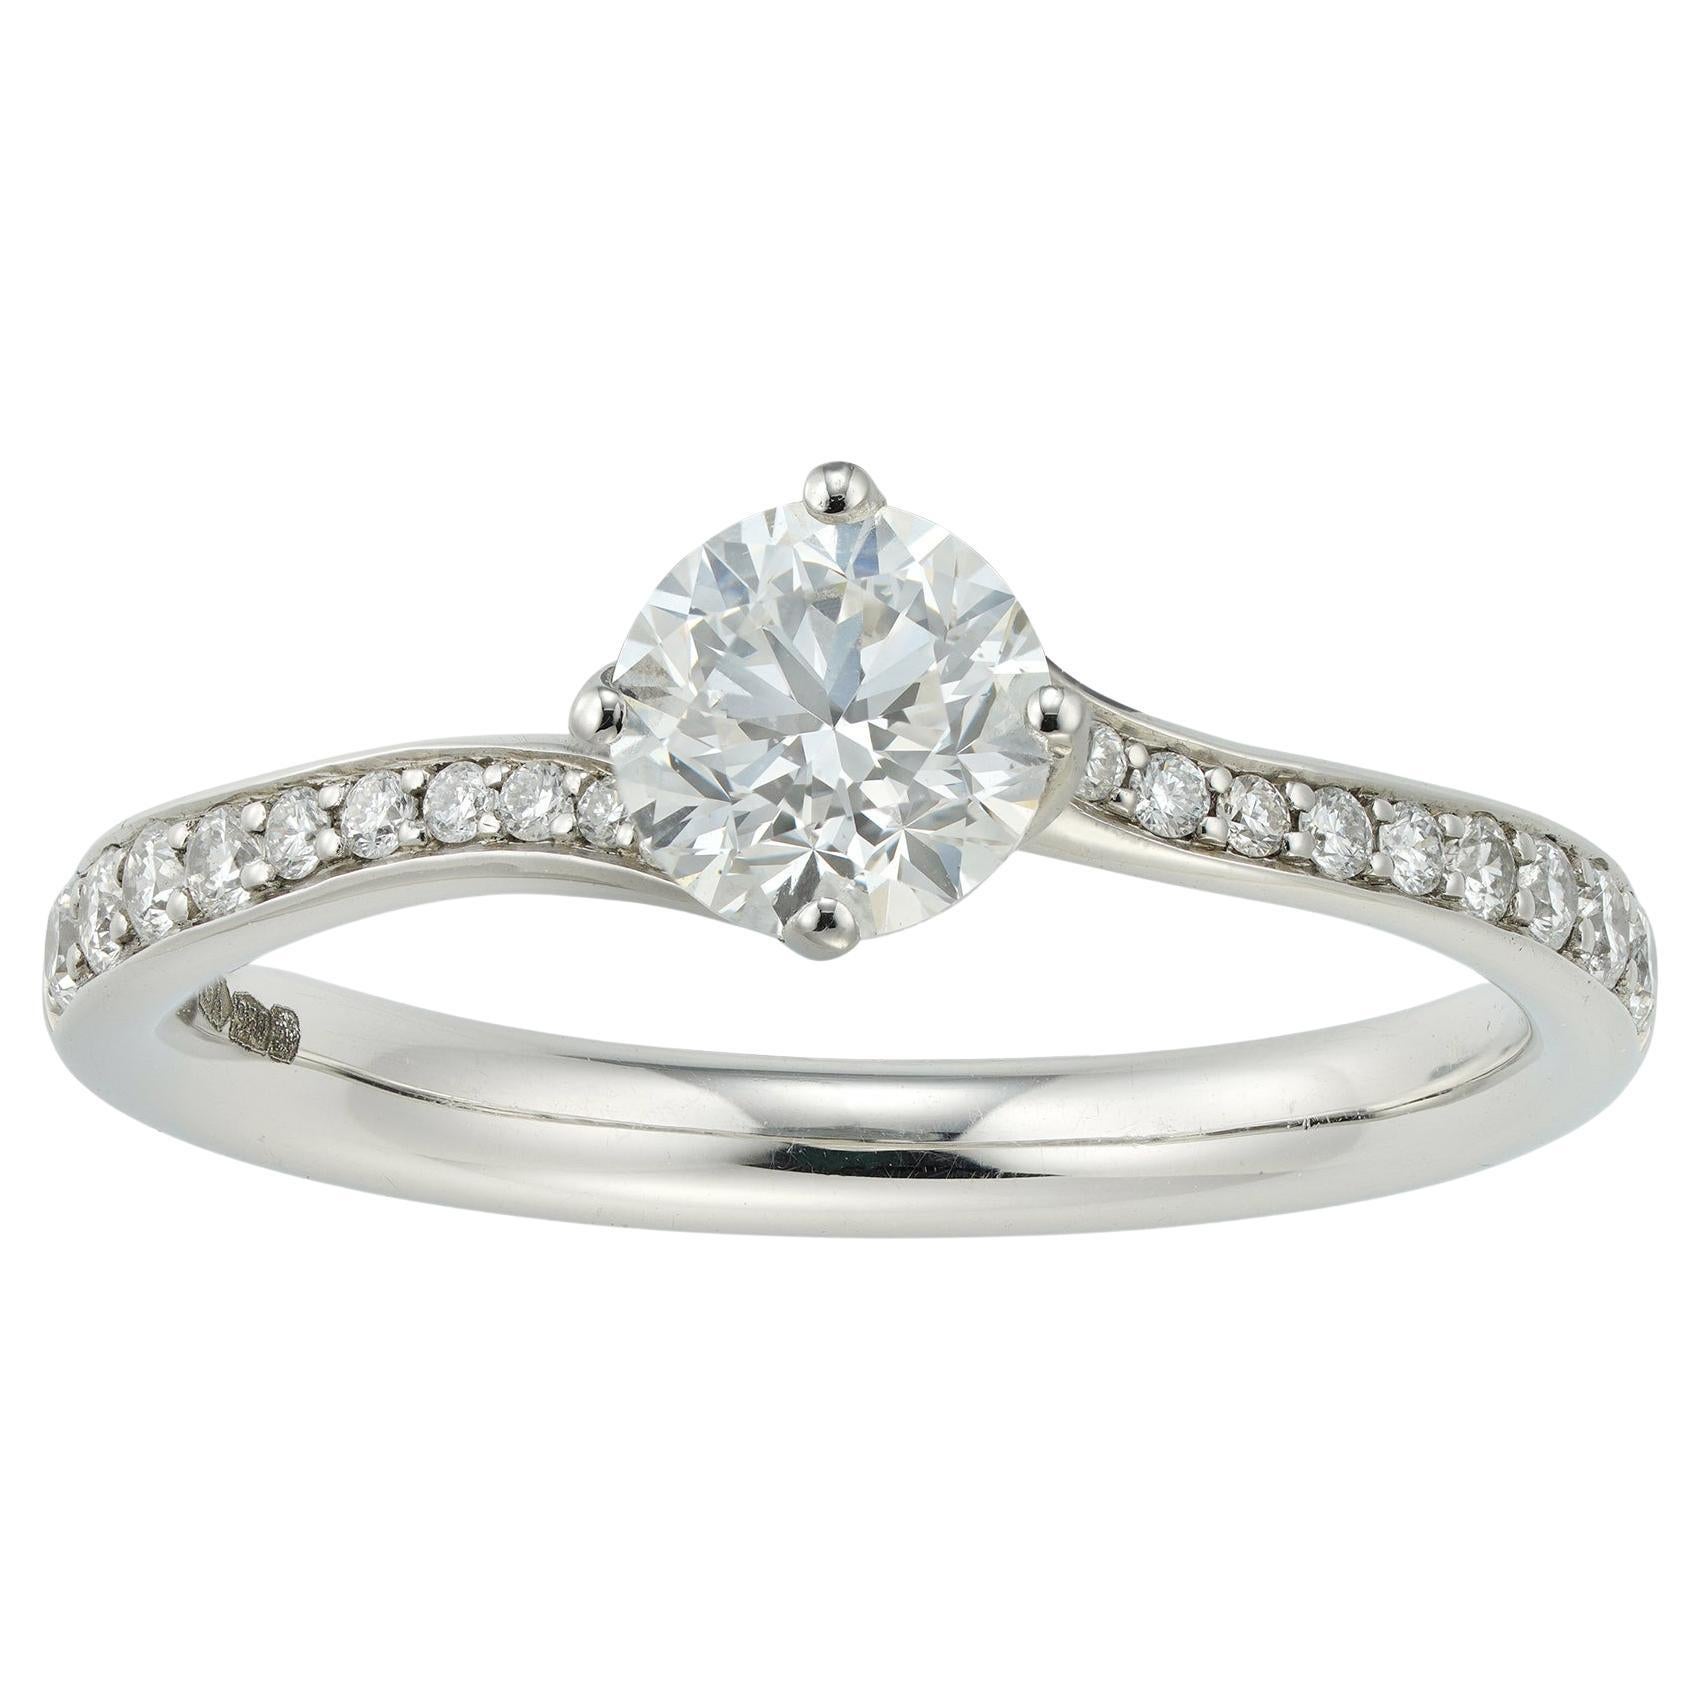 A solitaire diamond ring For Sale